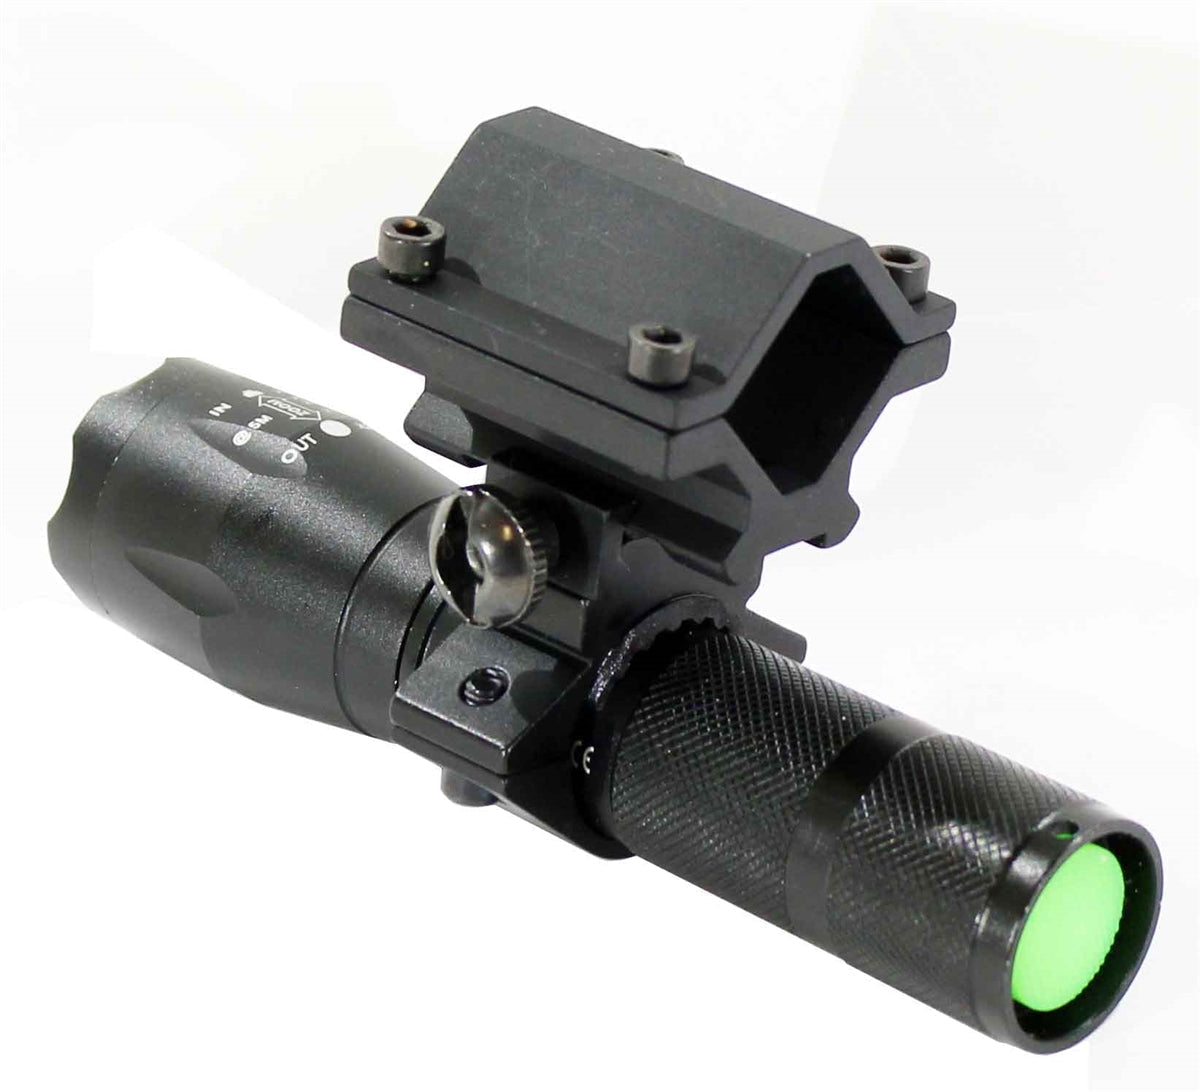 Tactical 1200 Lumen Flashlight With Mount Compatible With Stoeger Freedom series 12 Gauge Pumps.